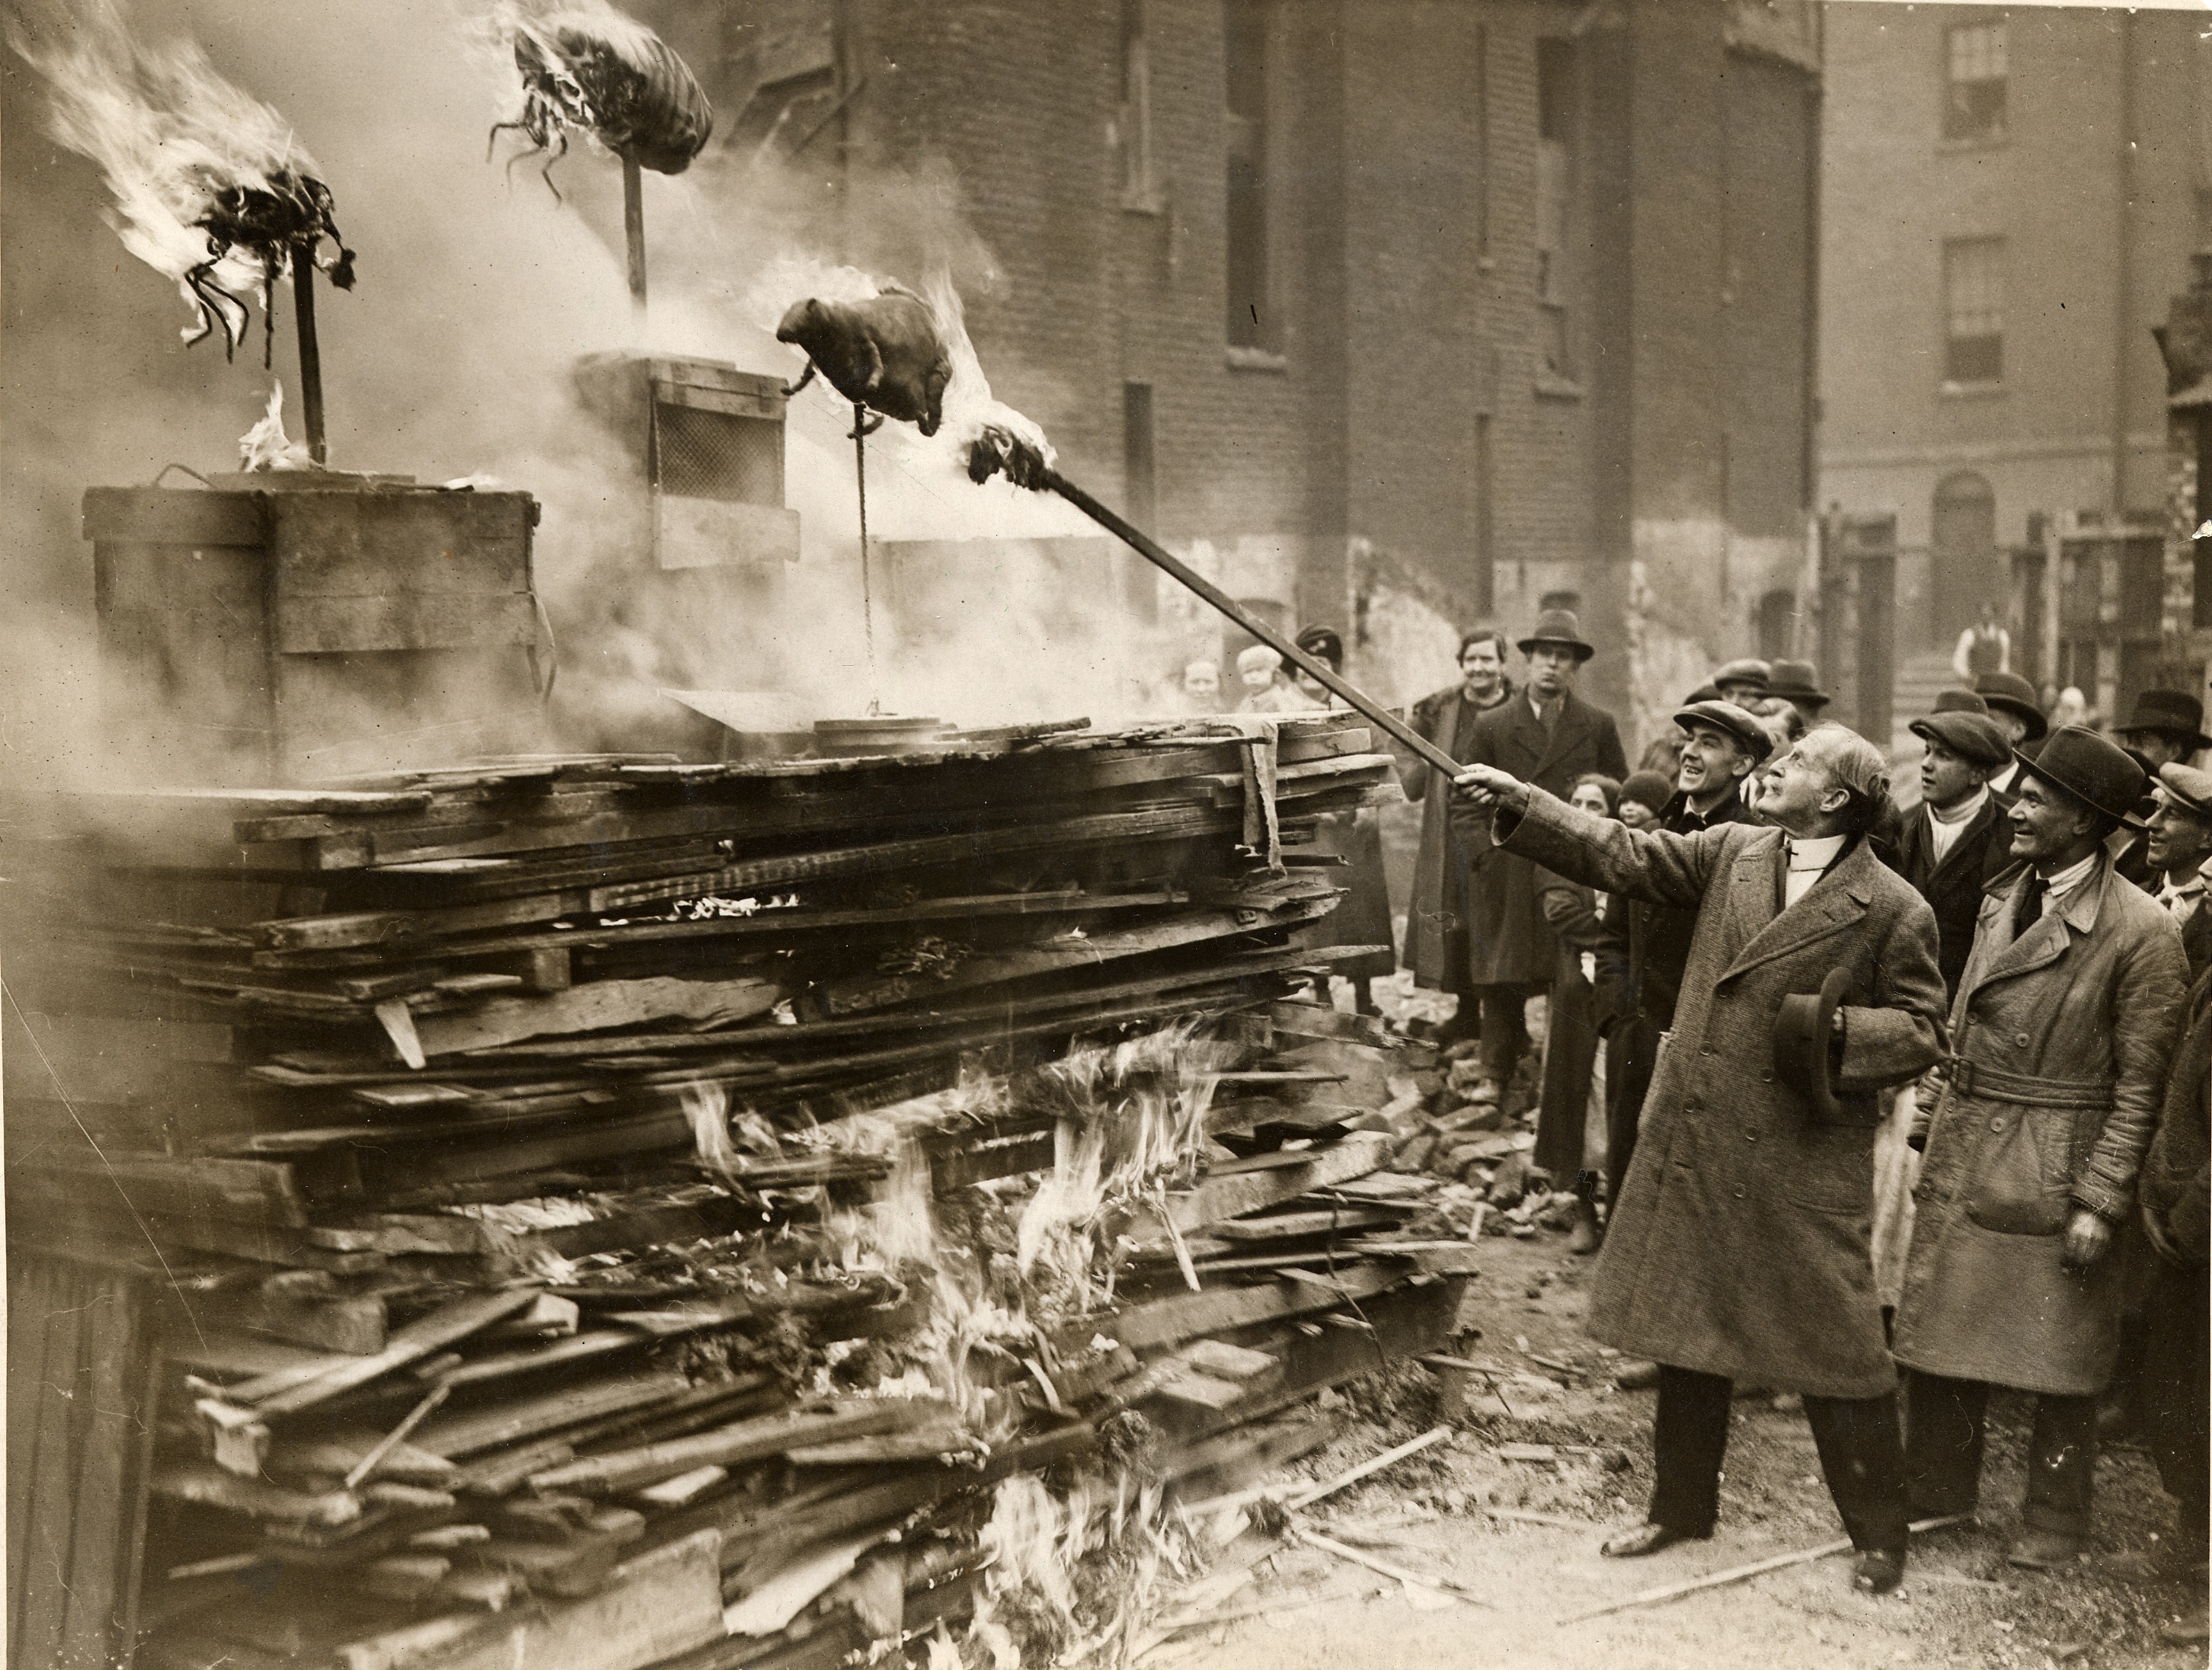 Ceremonial burning of models of bugs at the opening of St Christopher’s Flats in Somers Town in 1931 